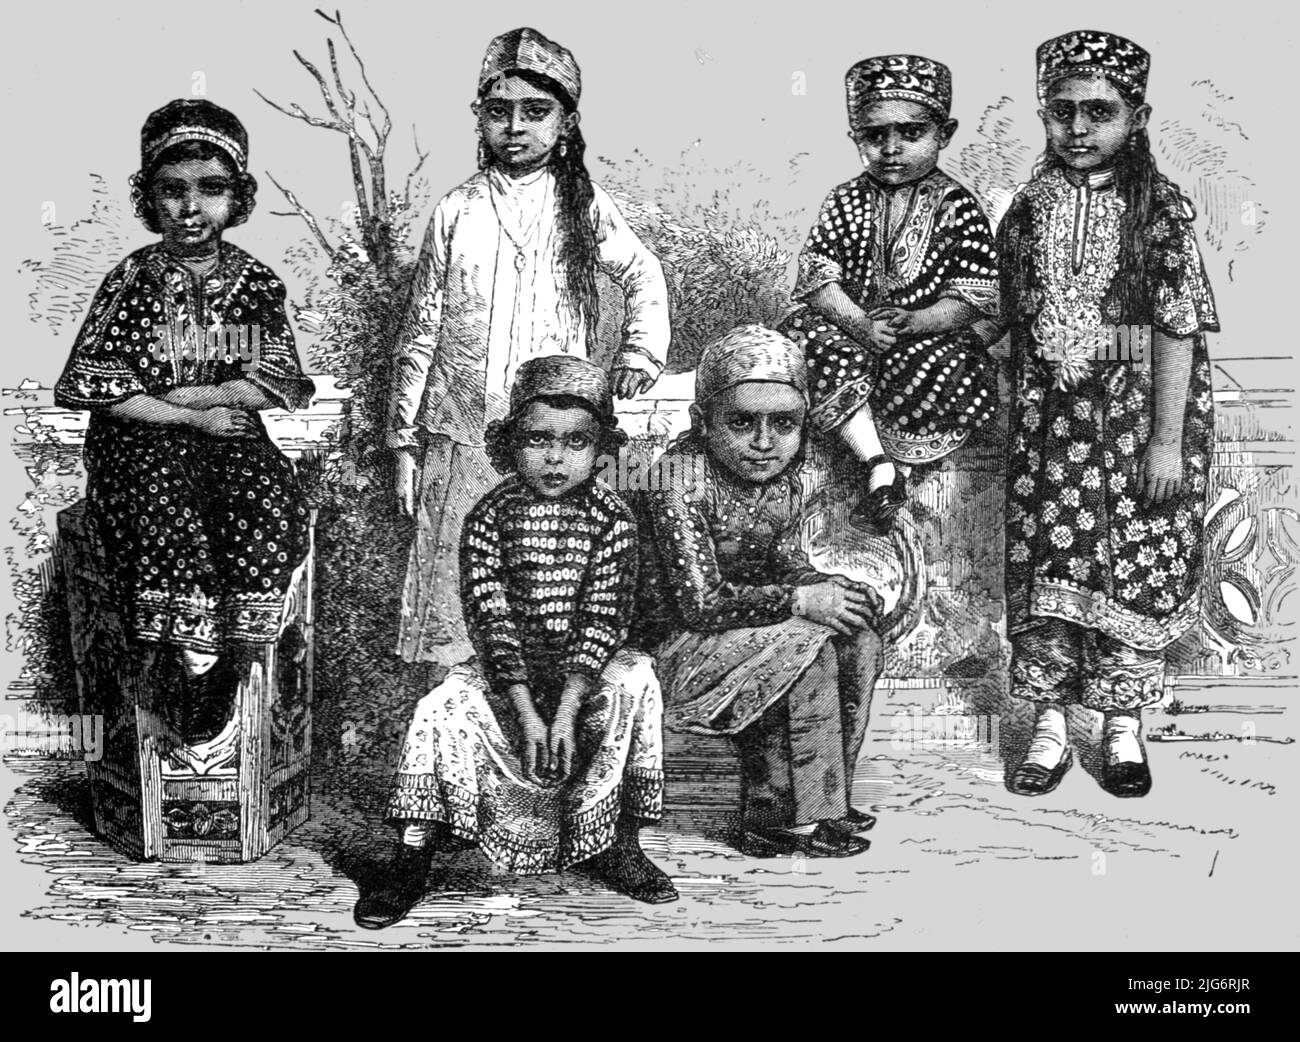 'Parsee Children, Bombay; Notes on Bombay and the Malabar Coast', 1875. [Parsi children from what is now Mumbai, India]. From, 'Illustrated Travels' by H.W. Bates. [Cassell, Petter, and Galpin, c1880, London] Belle Sauvage Works.London E.C. Stock Photo